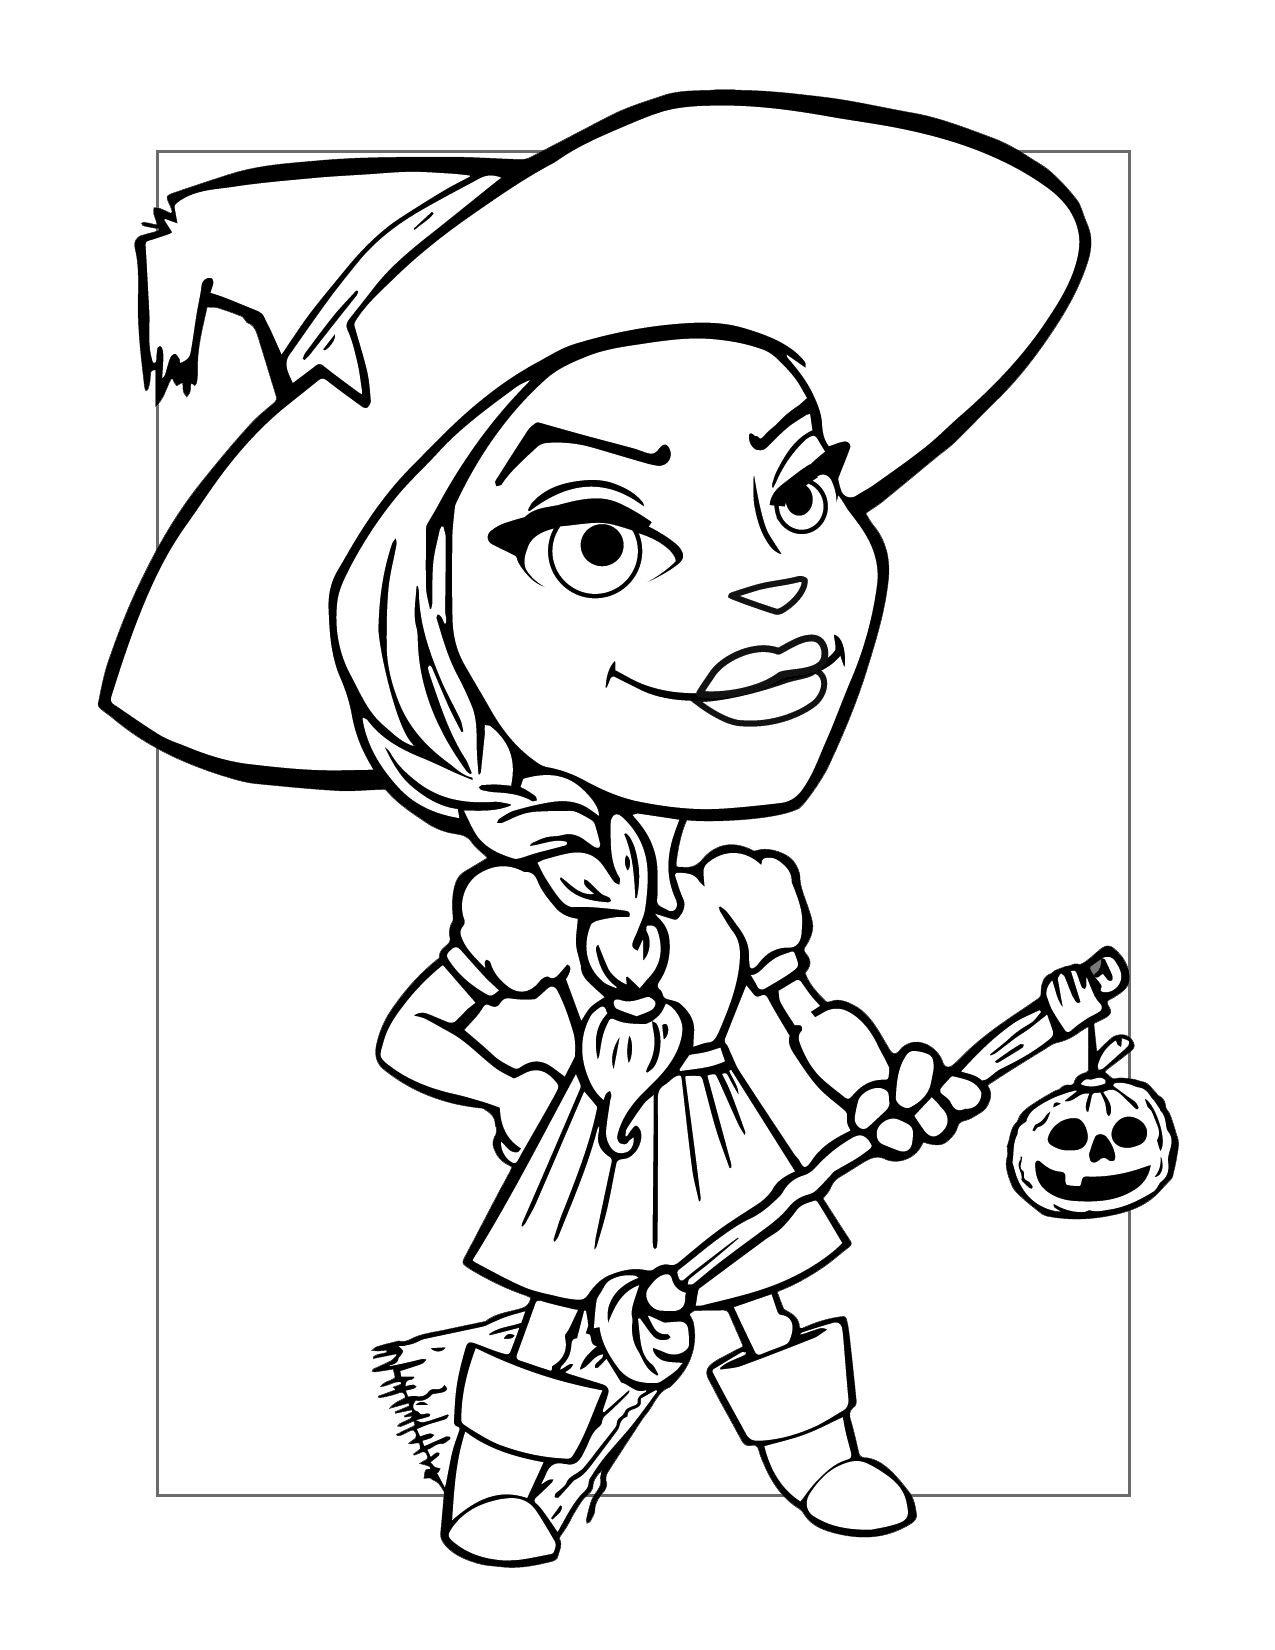 Cute Witch Girl With Broom Coloring Page